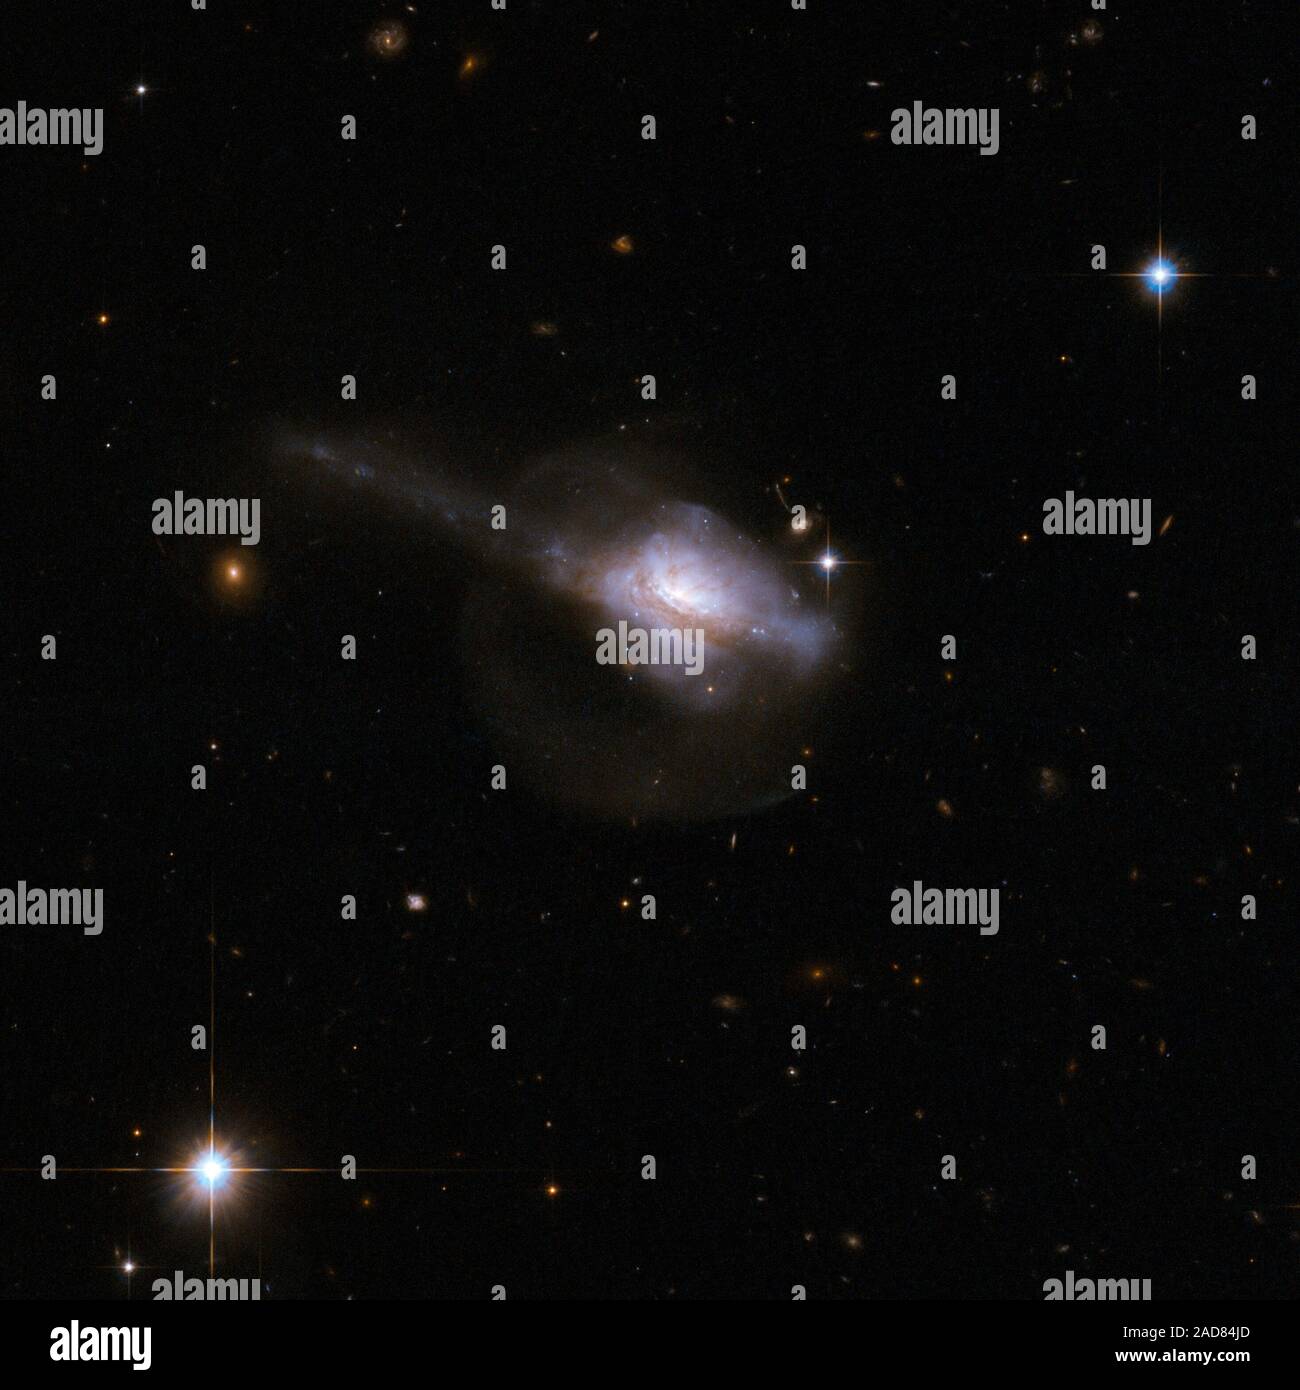 UGC 5101 is a peculiar galaxy with a single nucleus contained within an unstructured main body that suggests a recent interaction and merger. UGC 5101 is thought to contain an active galactic nucleus an extremely bright, compact core - buried deep in the gas and dust. A pronounced tail extends diagonally to the top-right of the frame. A fainter halo of stars surrounds the galaxy and is visible in the image, due to Hubble s ability to collect and detect faint light. This halo is probably a result of the earlier collision. UGC 5101 is about 550 million light-years away from Earth.   This image i Stock Photo